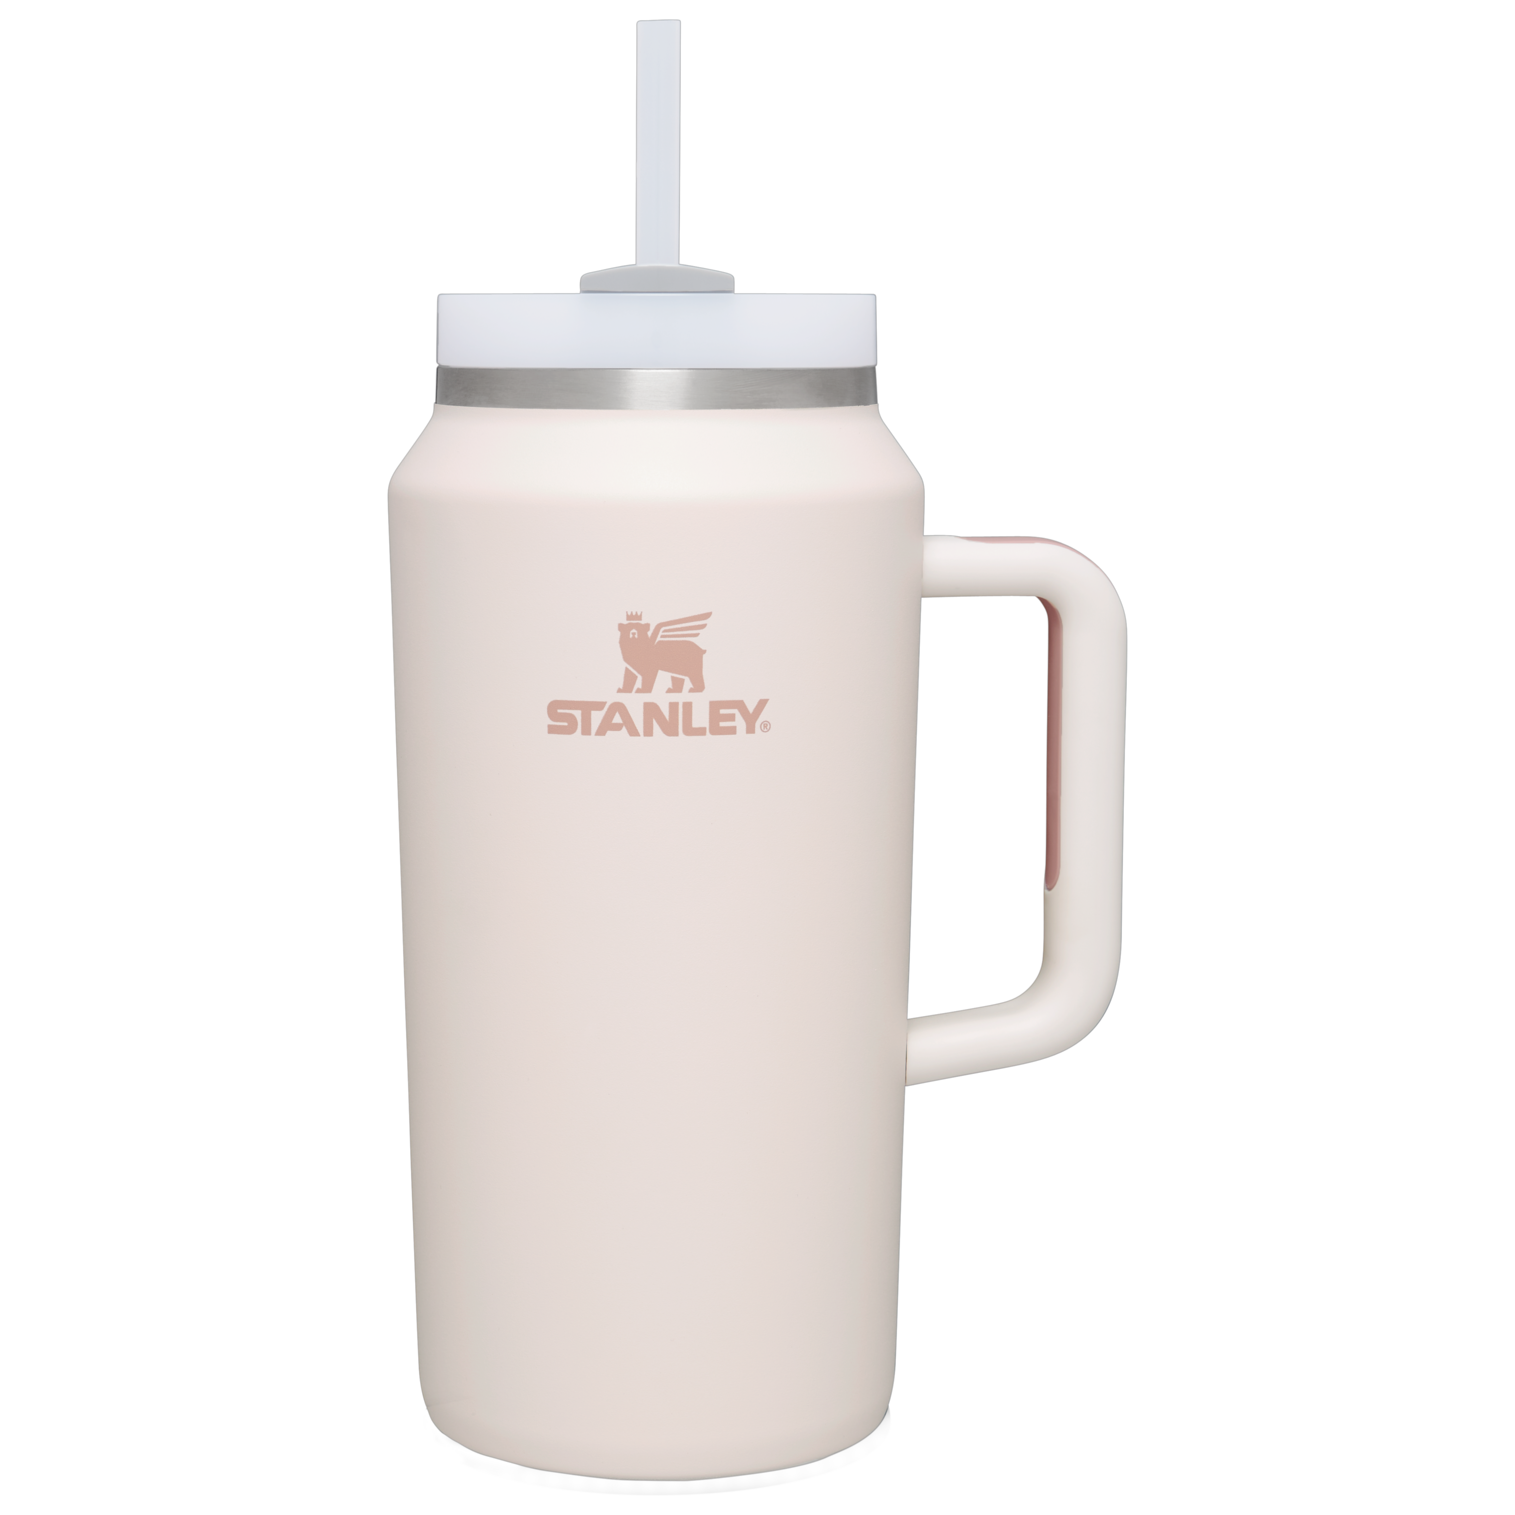 Stanley 64 oz Stainless Steel H2.0 Flowstate Quencher Tumbler Dusk